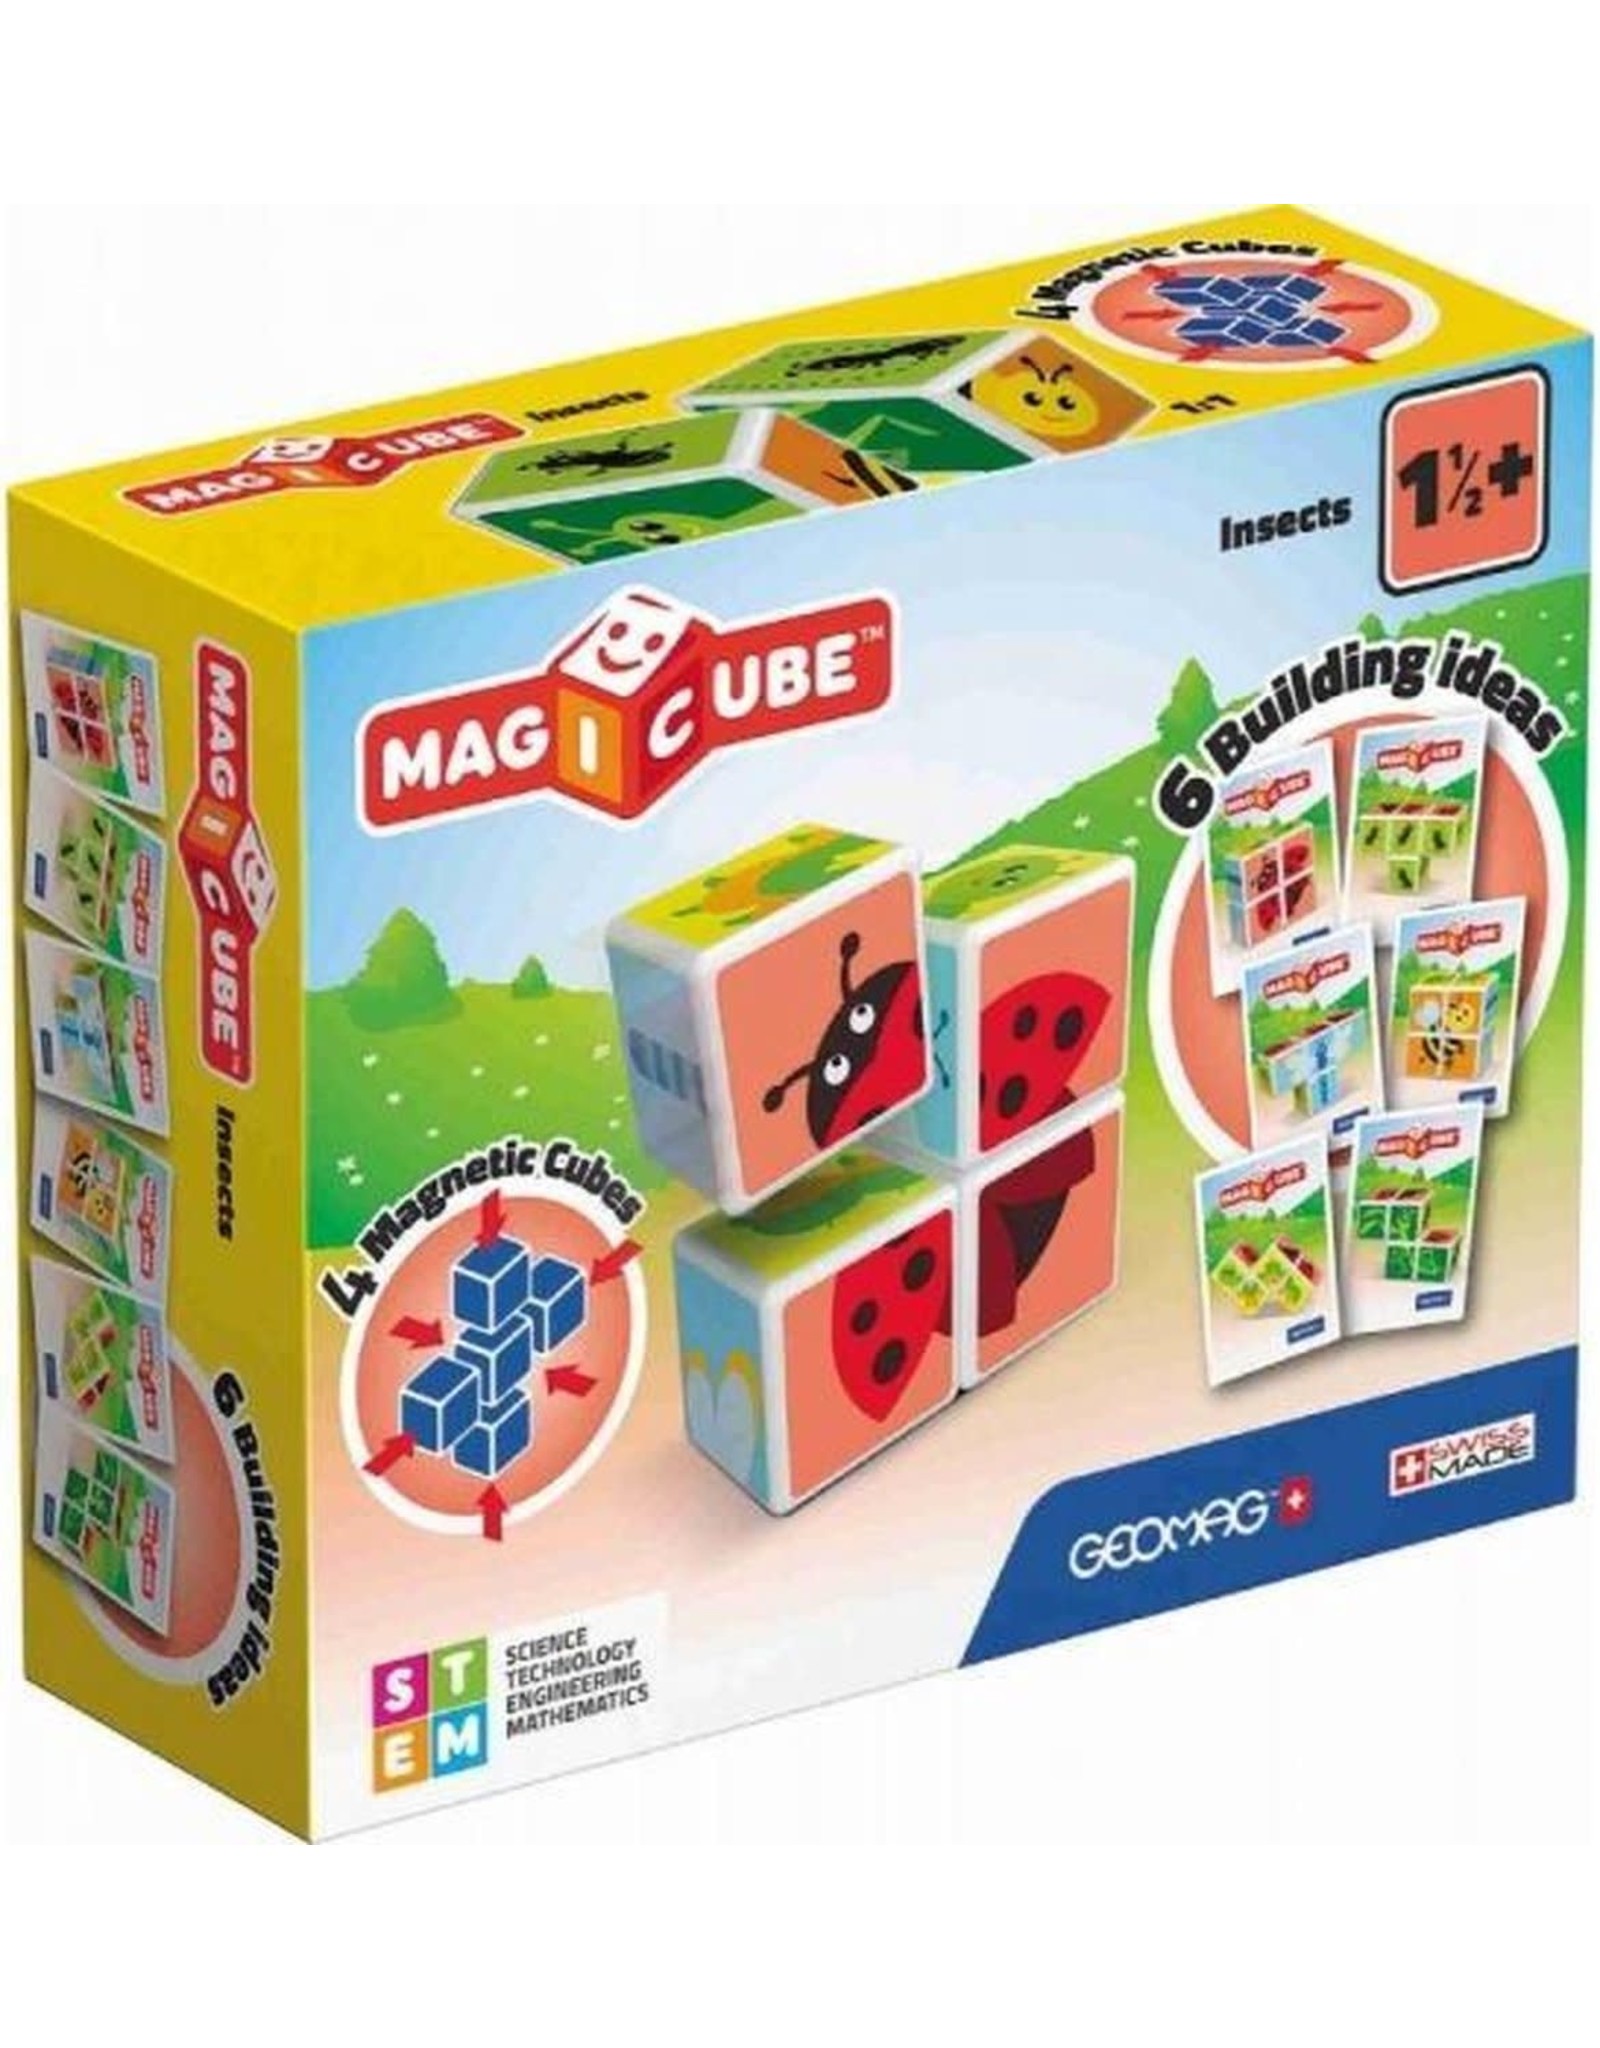 Geomag MagiCube Insects